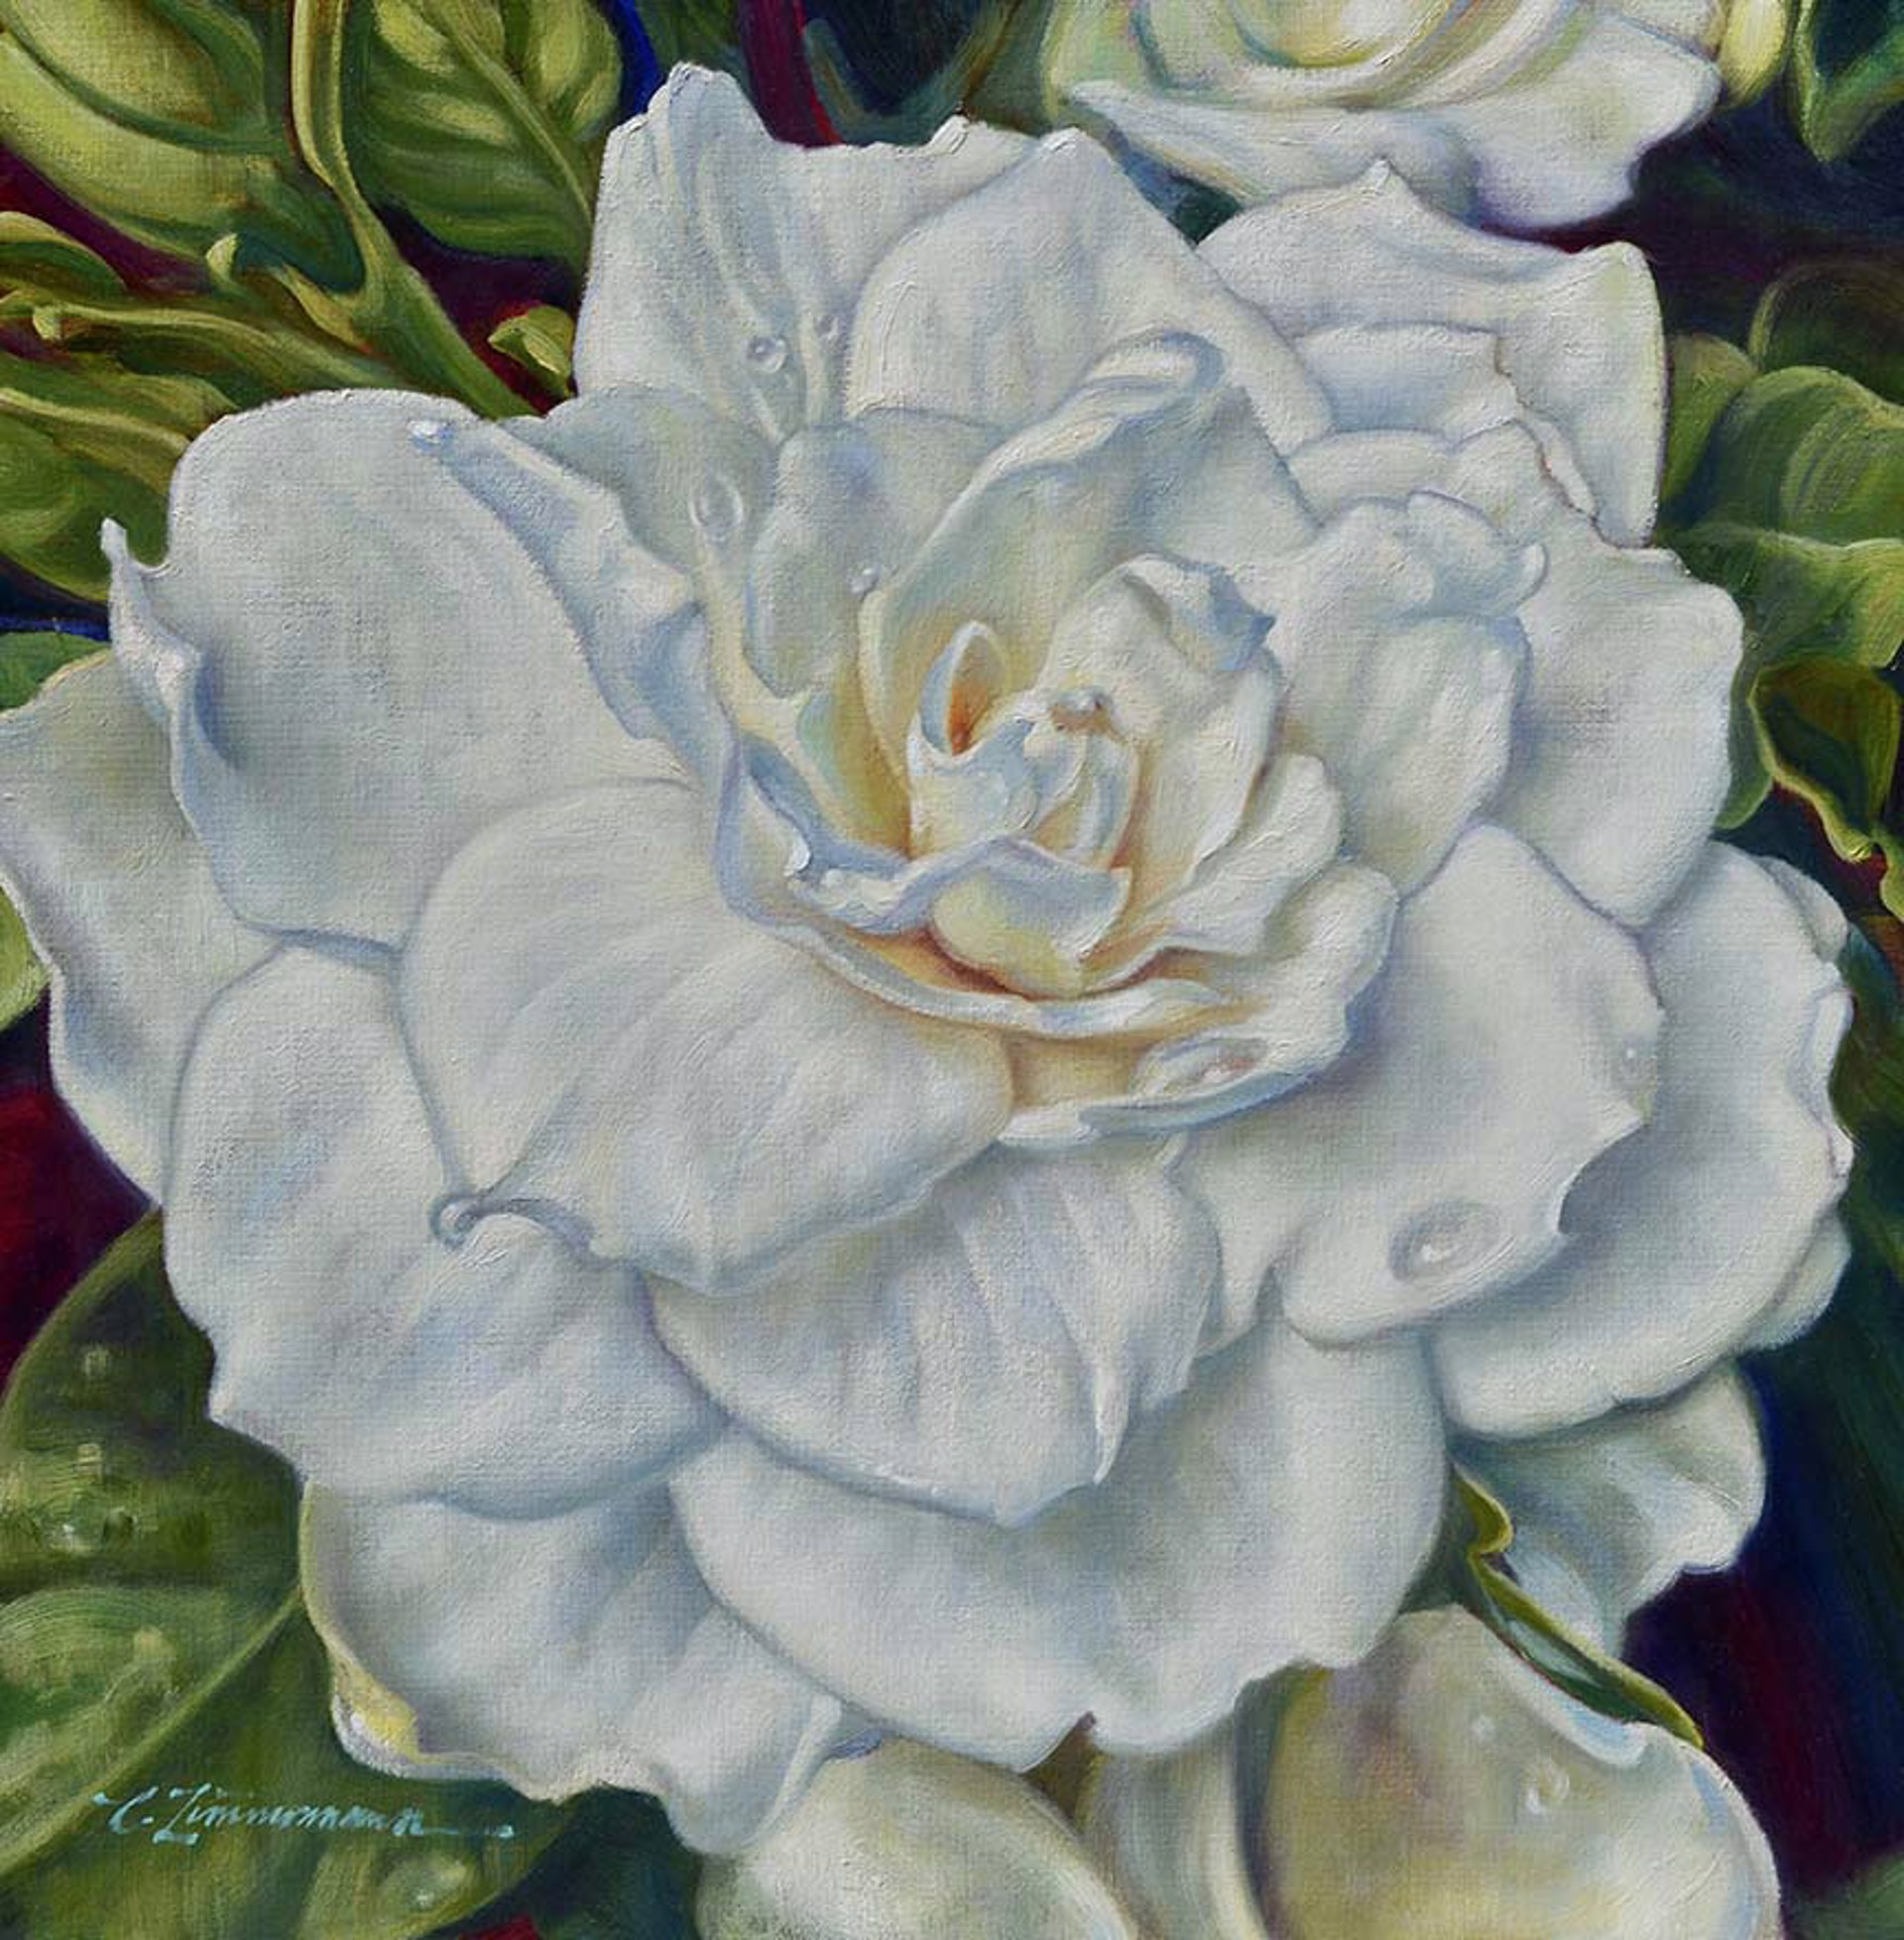 Rainsong Gardenia 1 - SOLD by Commission Possibilities / Previously Sold ZX